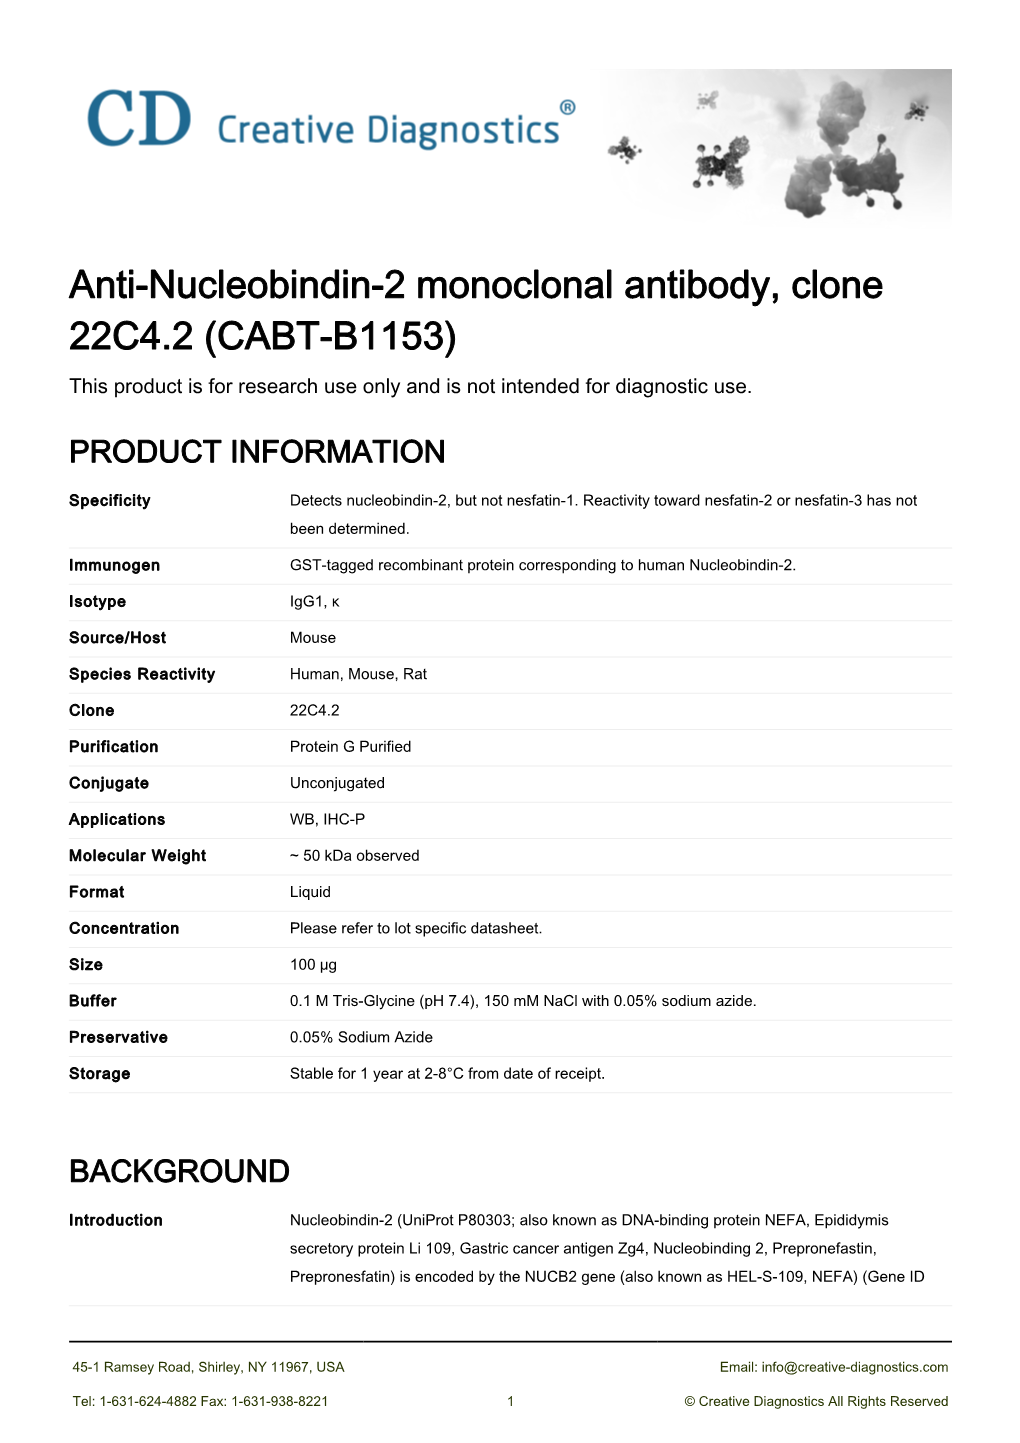 Anti-Nucleobindin-2 Monoclonal Antibody, Clone 22C4.2 (CABT-B1153) This Product Is for Research Use Only and Is Not Intended for Diagnostic Use